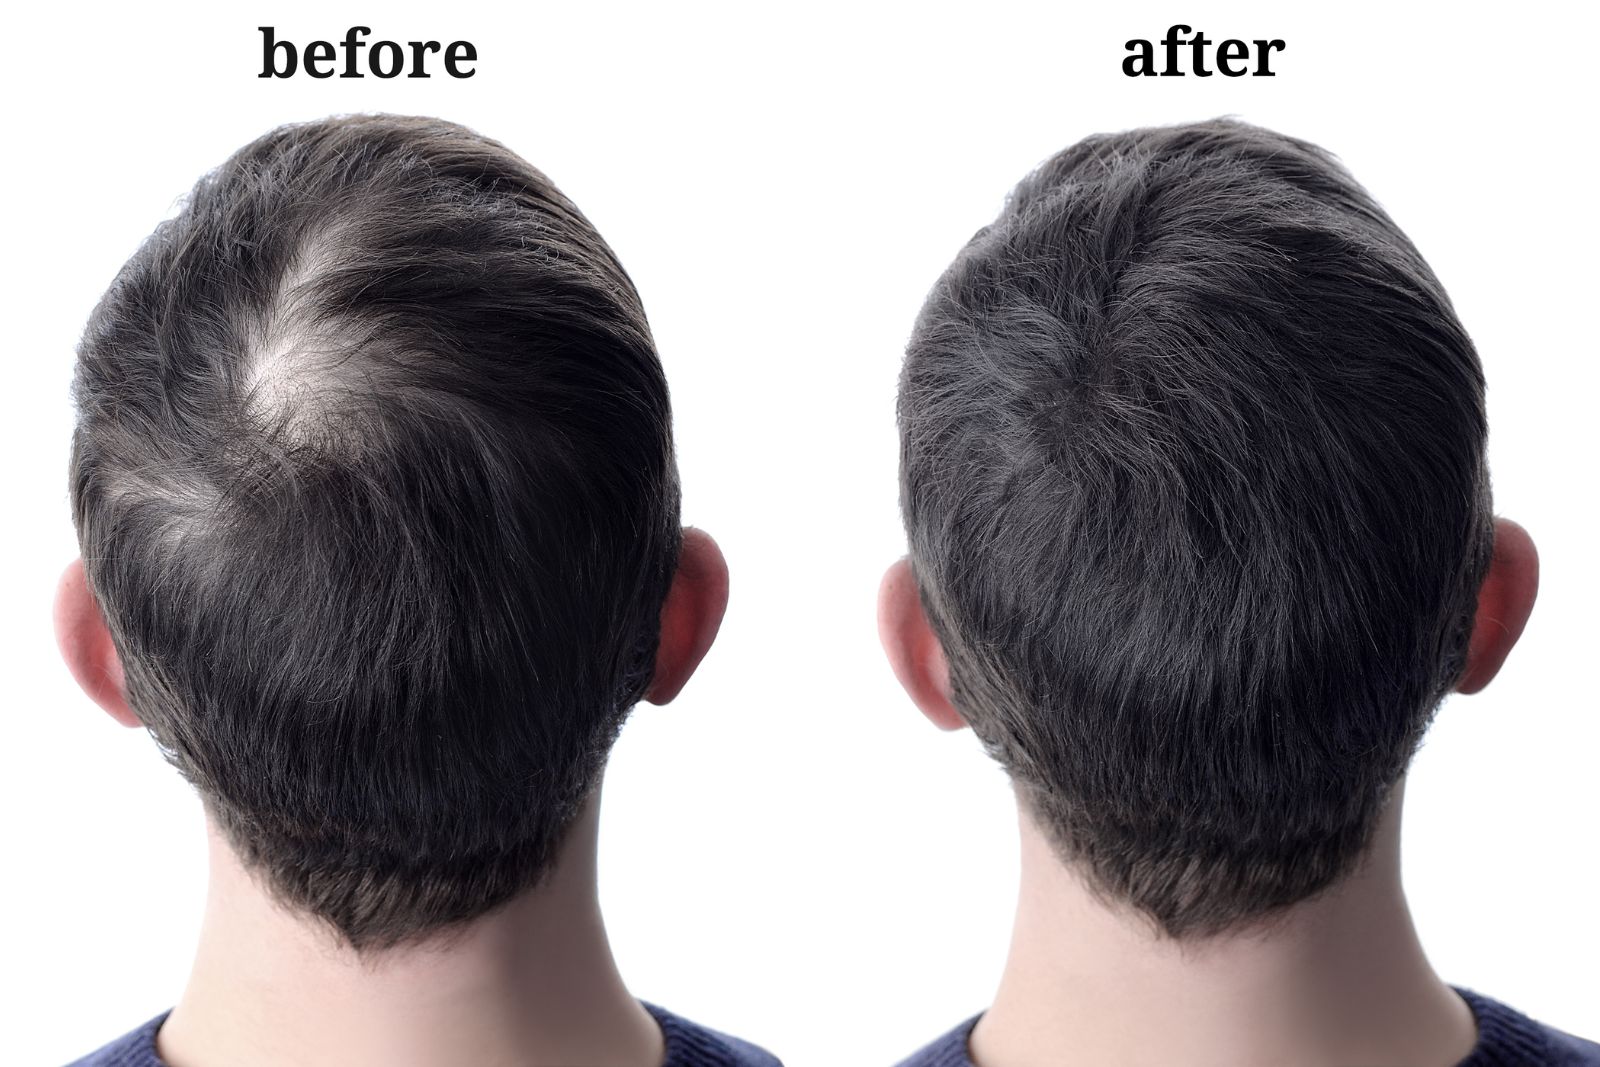 Men hair after using cosmetic powder for hair thickening. Before and after